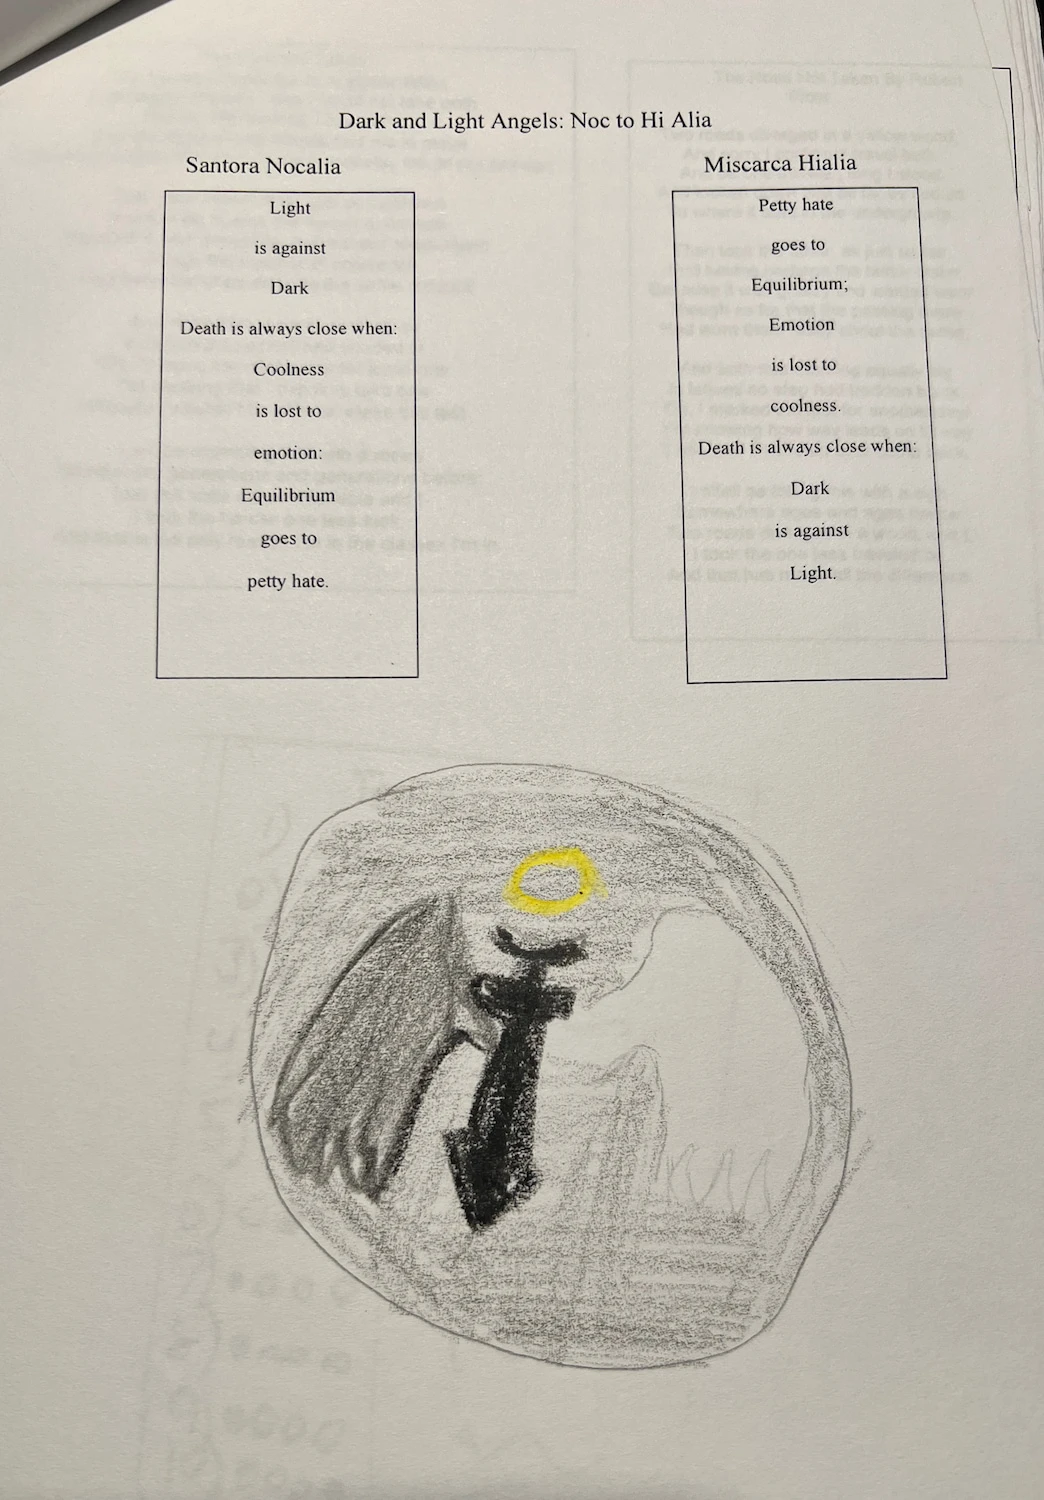 Image of the Dark and Light Angels Poem as part of a schoolwork poetry book